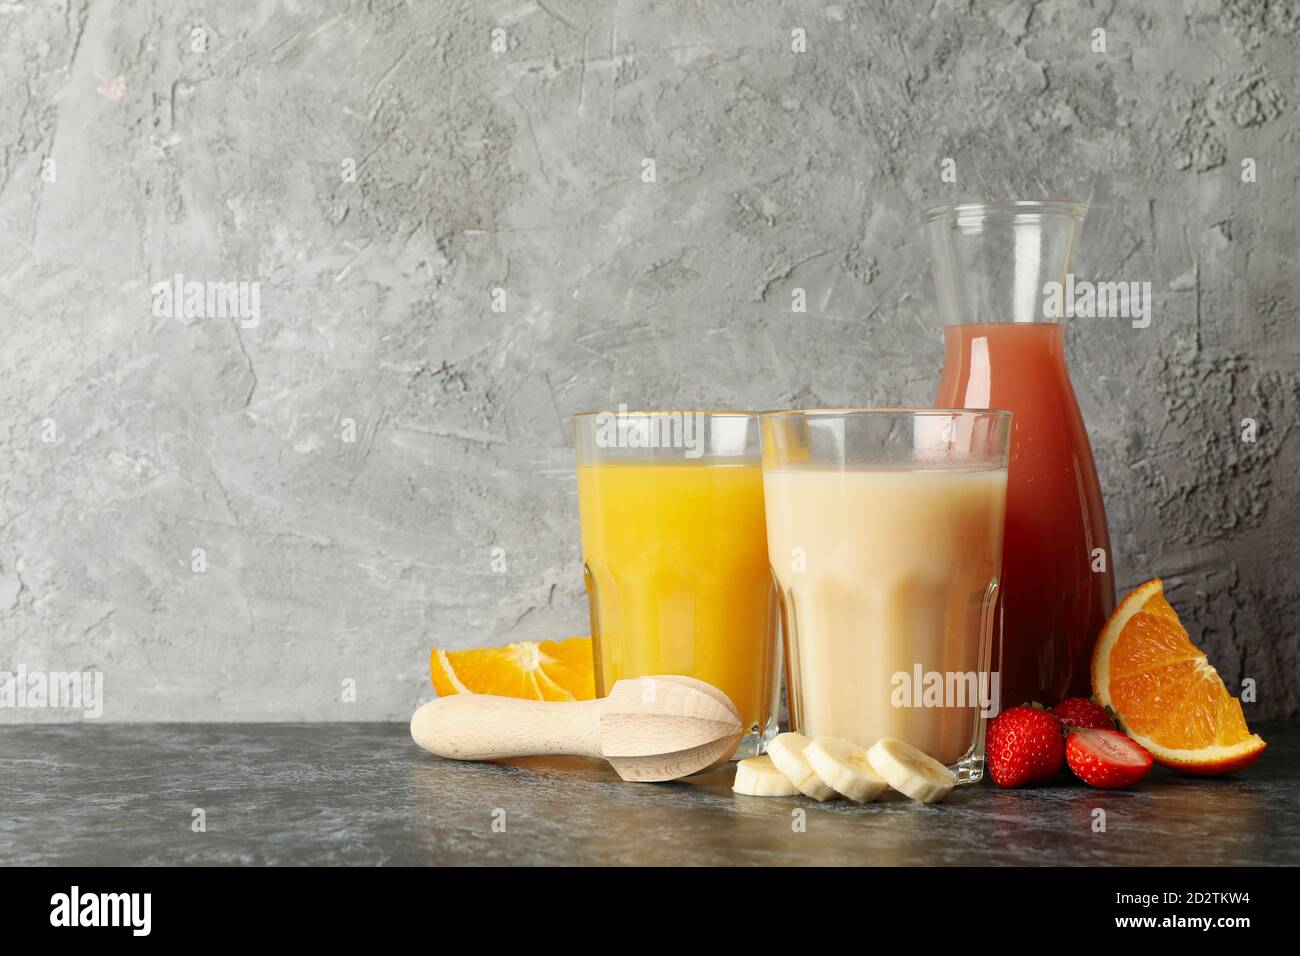 Jars with different juices against gray background Stock Photo